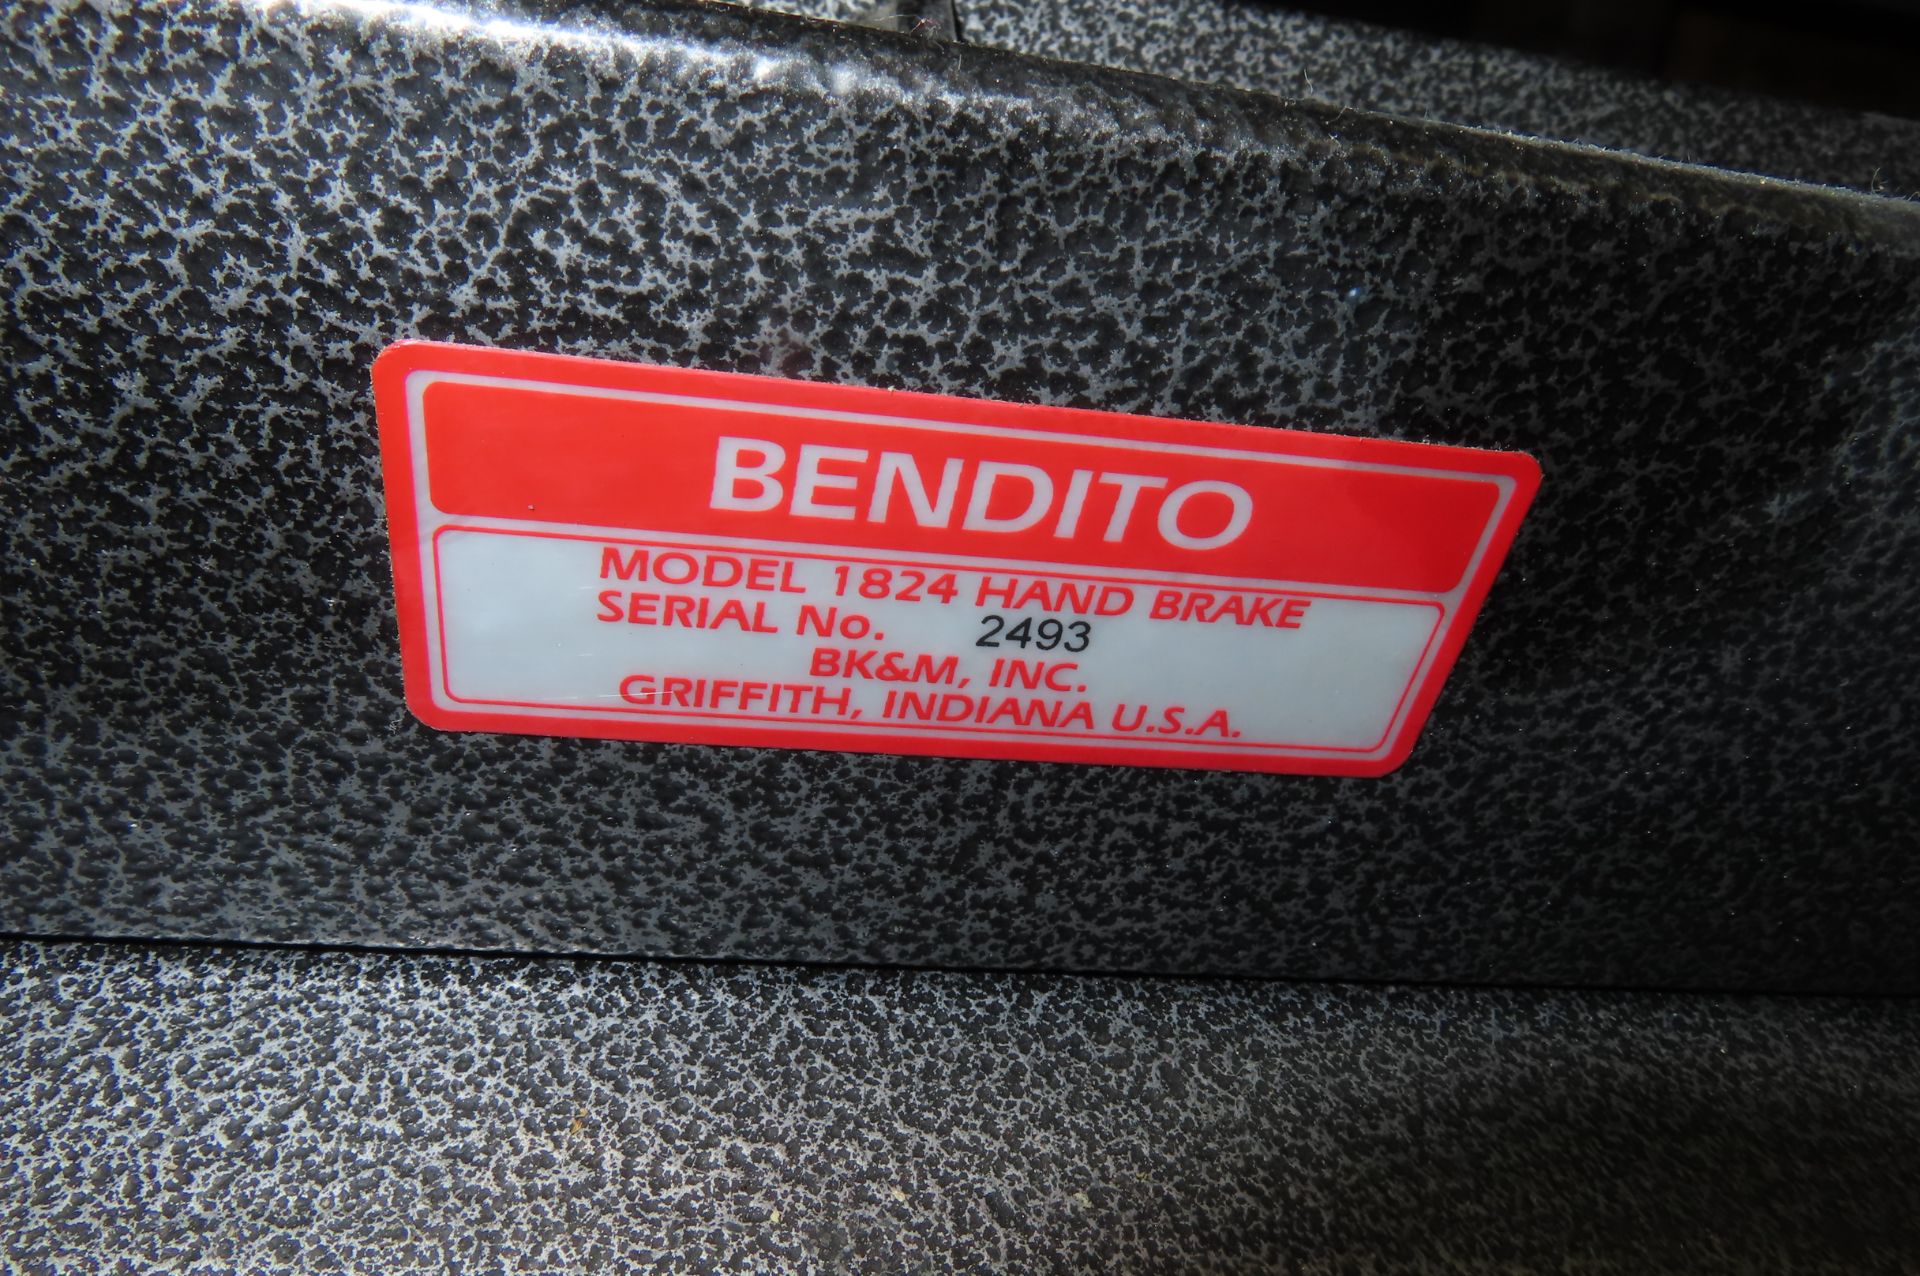 BENDITO NO 1824 HAND BRAKE WITH CREAPER, 24 IN. - Image 2 of 3